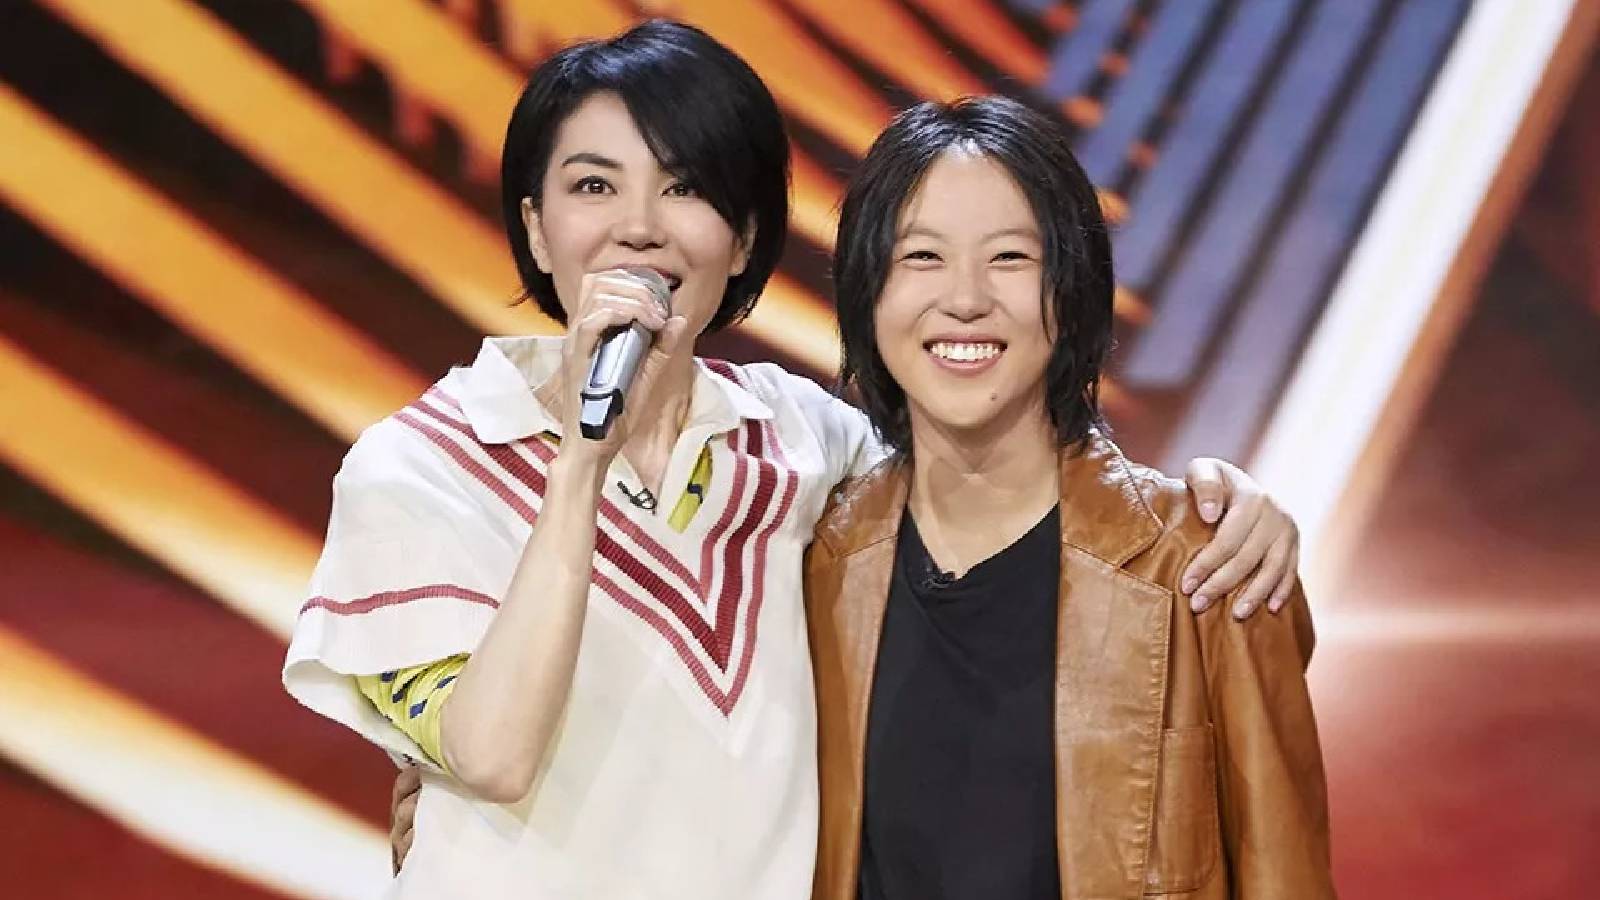 Leah Dou Says Her Mum Faye Wong’s Favourite Piece Of Advice To Her Is “Nothing Is Permanent”